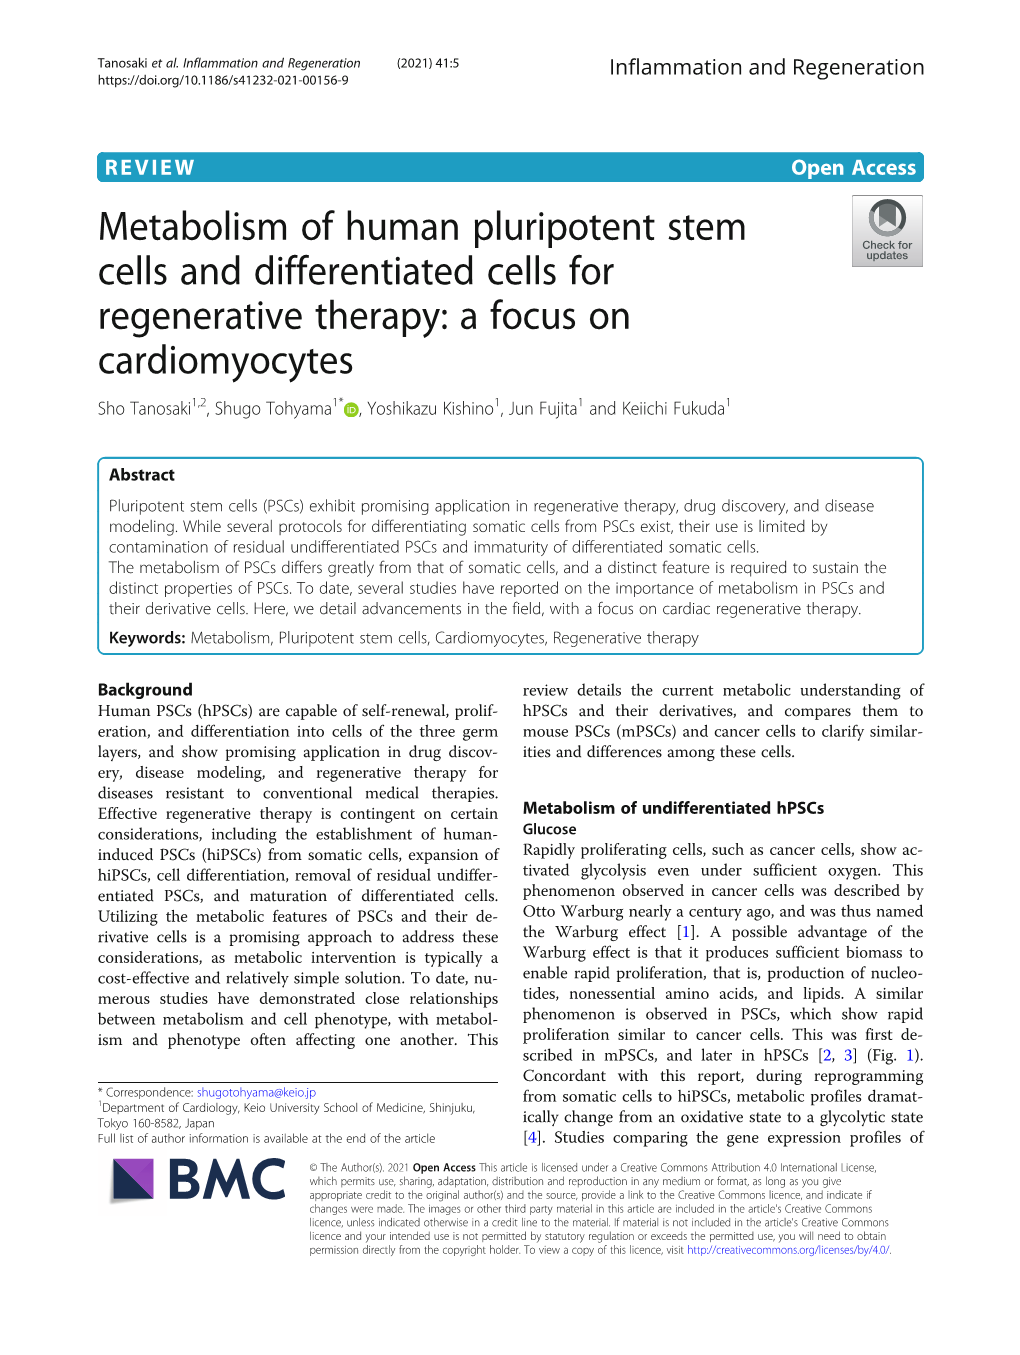 Metabolism of Human Pluripotent Stem Cells and Differentiated Cells For